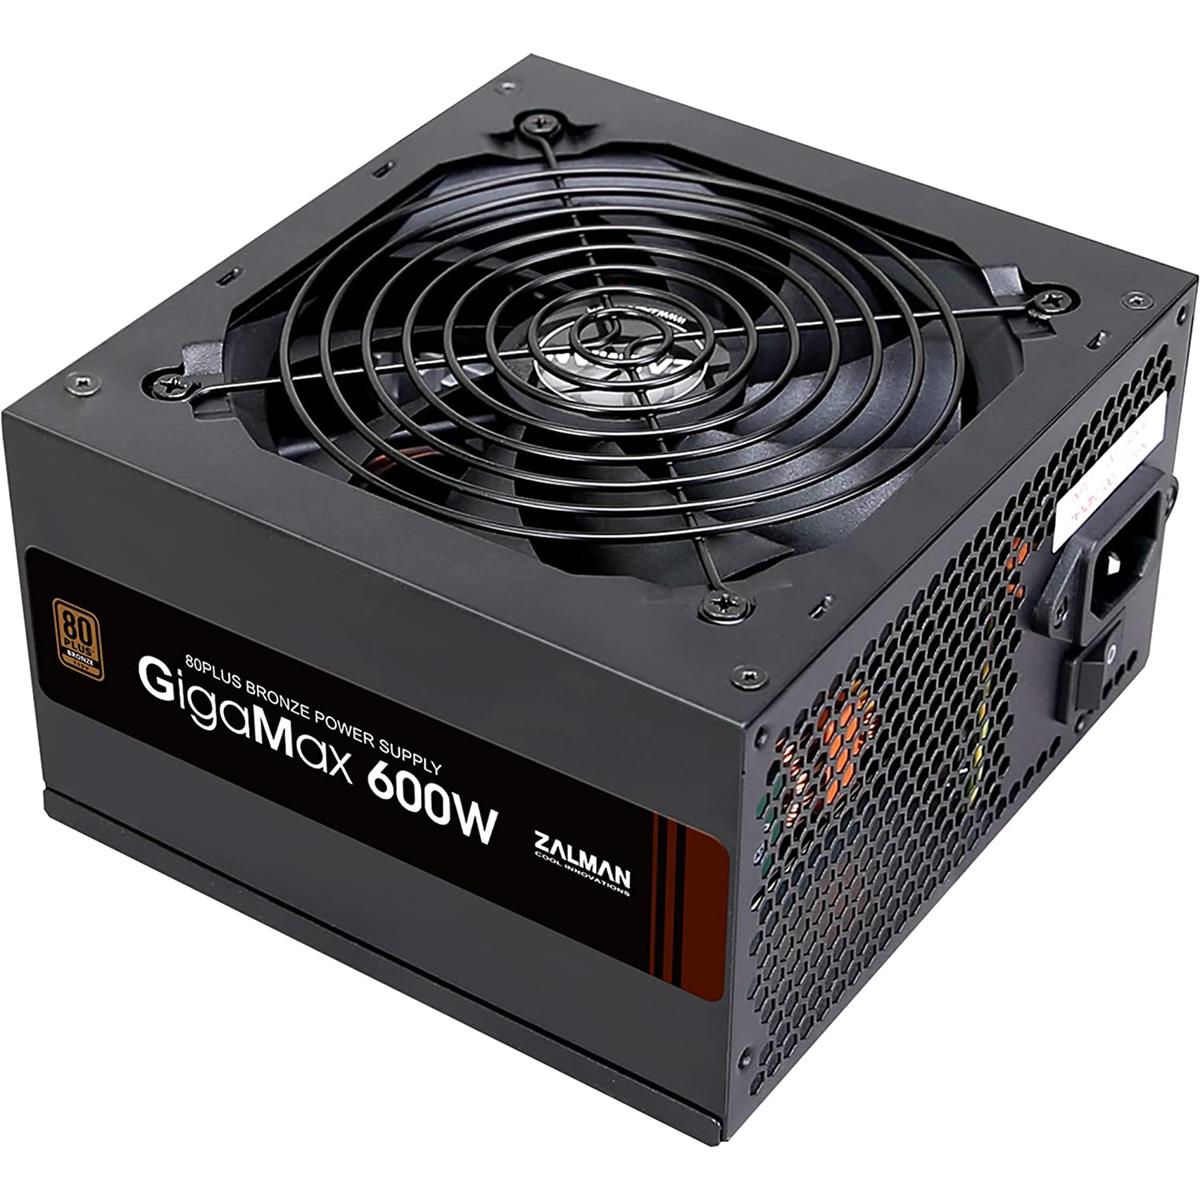 Image of Zalman Cases GigaMax 600W Standard ATX Power Supply